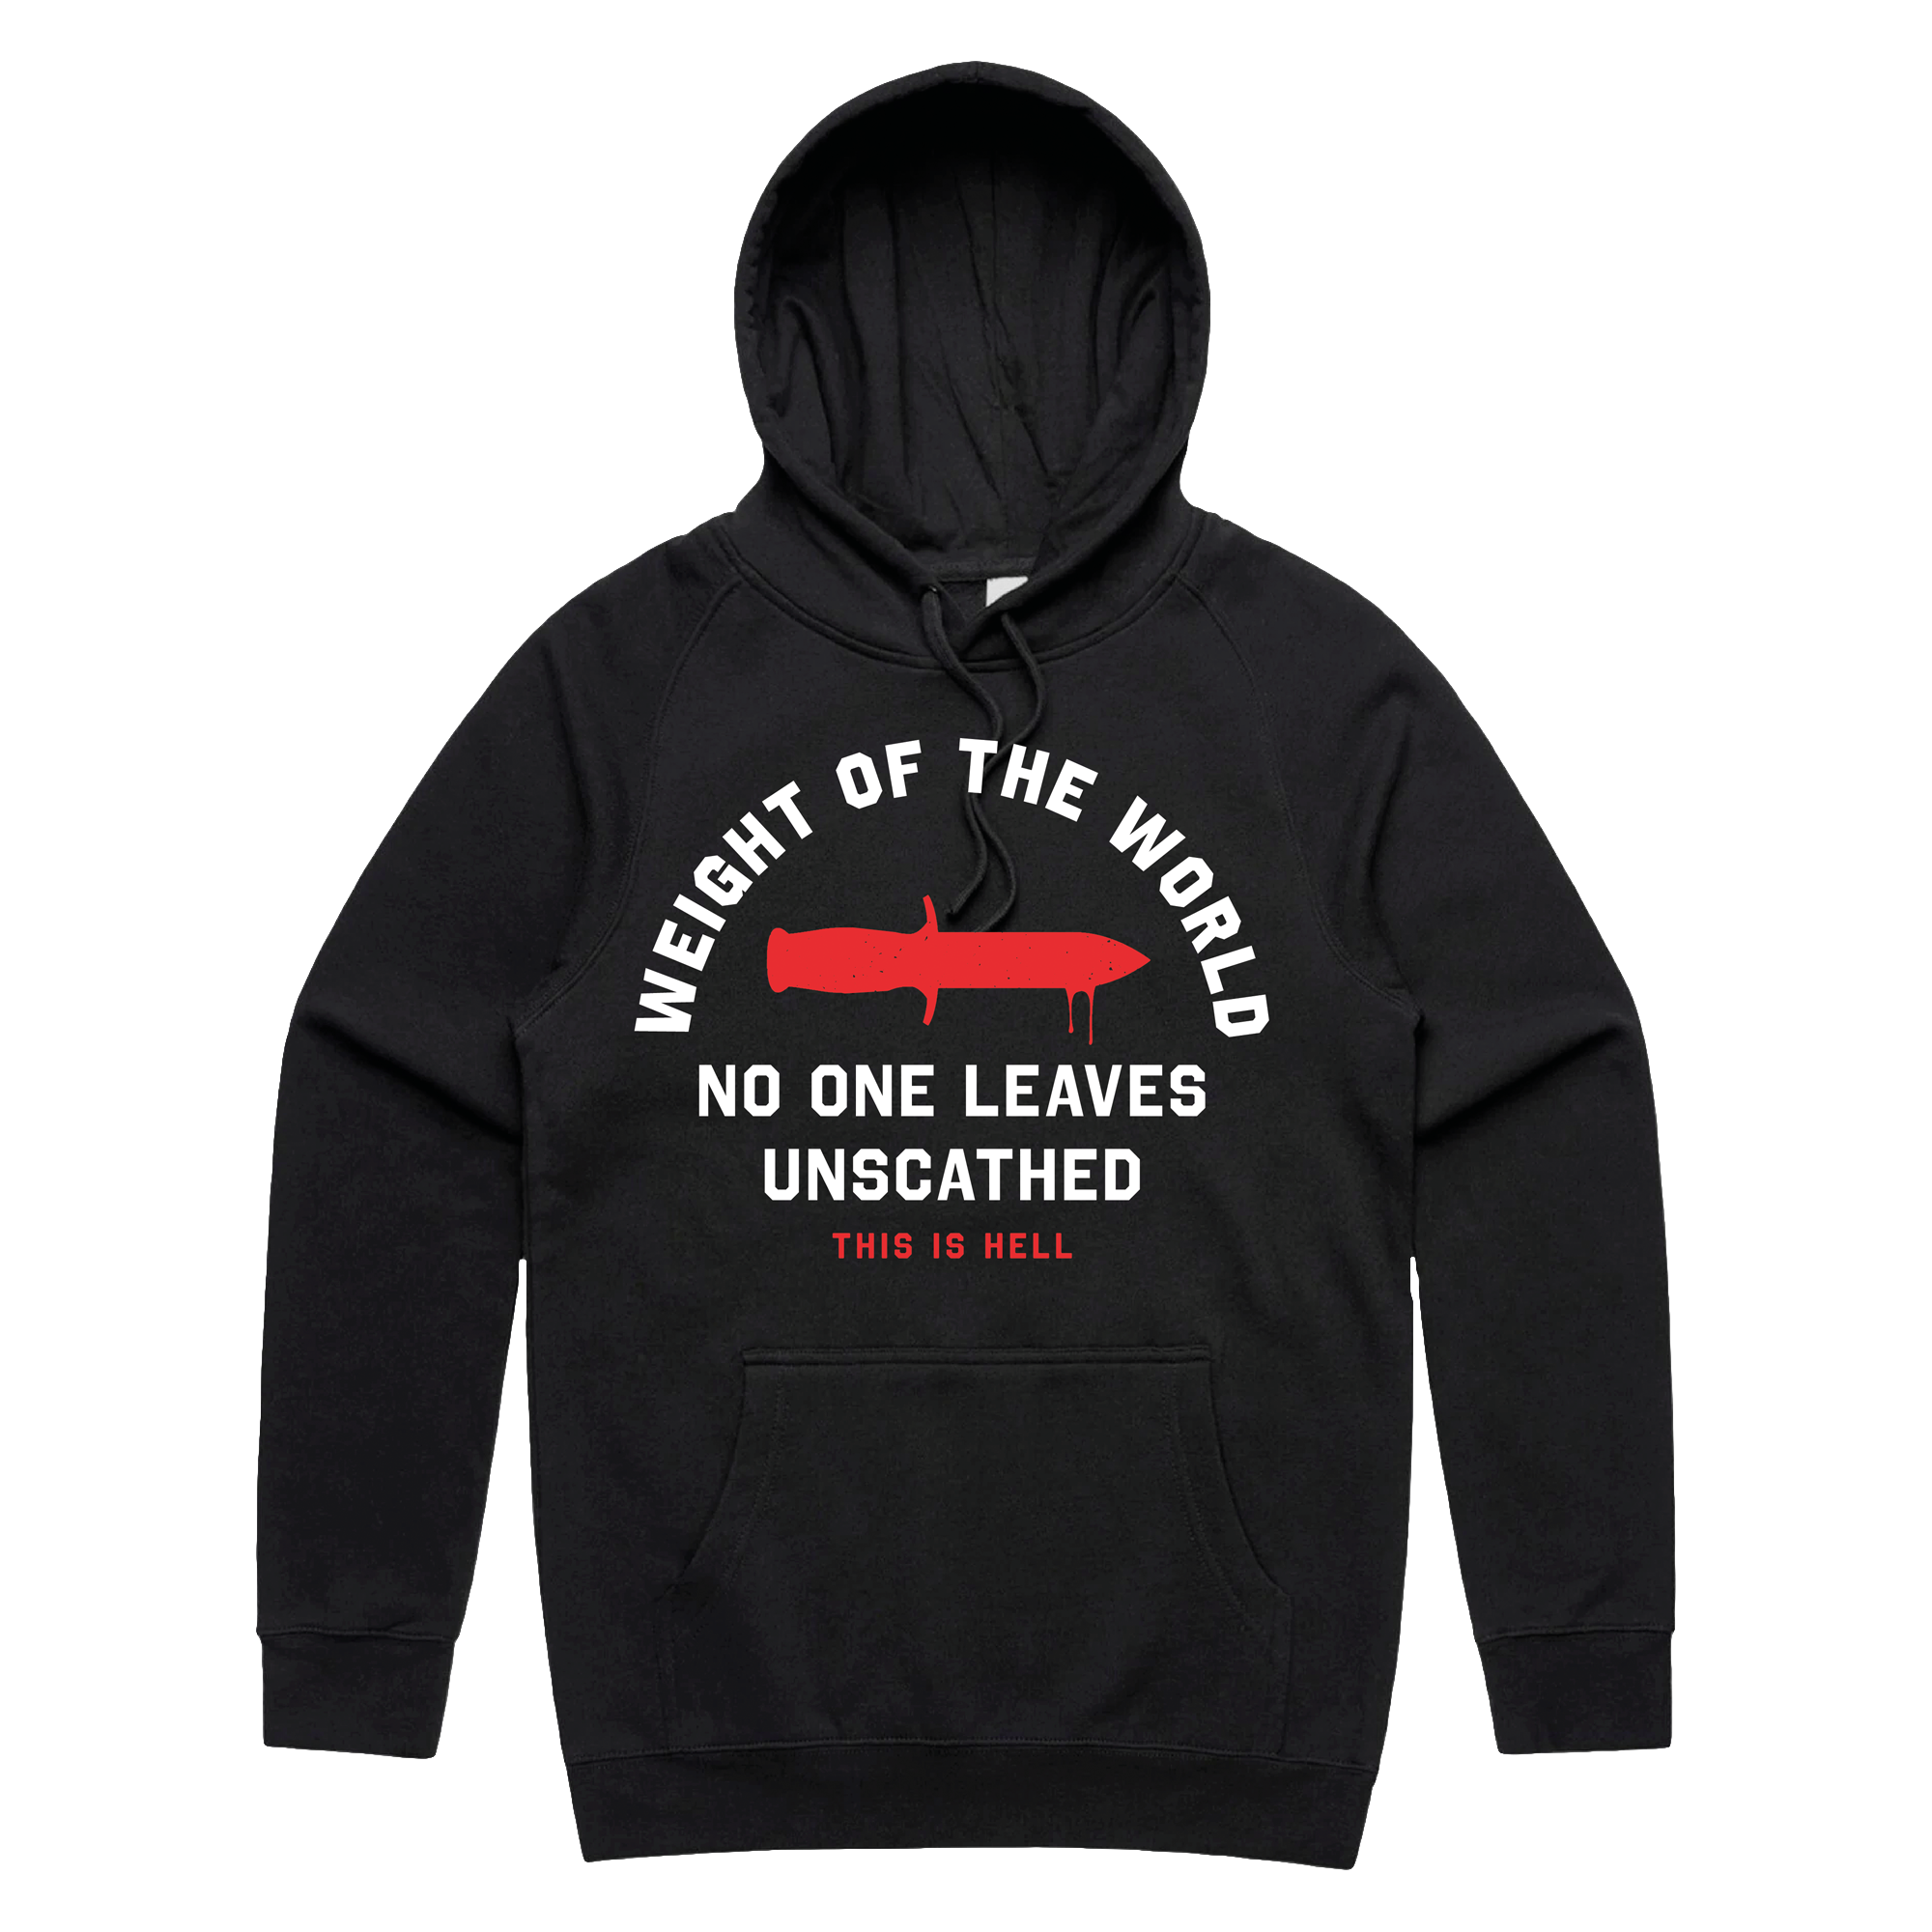 This Is Hell - Weight of the World Hoodie